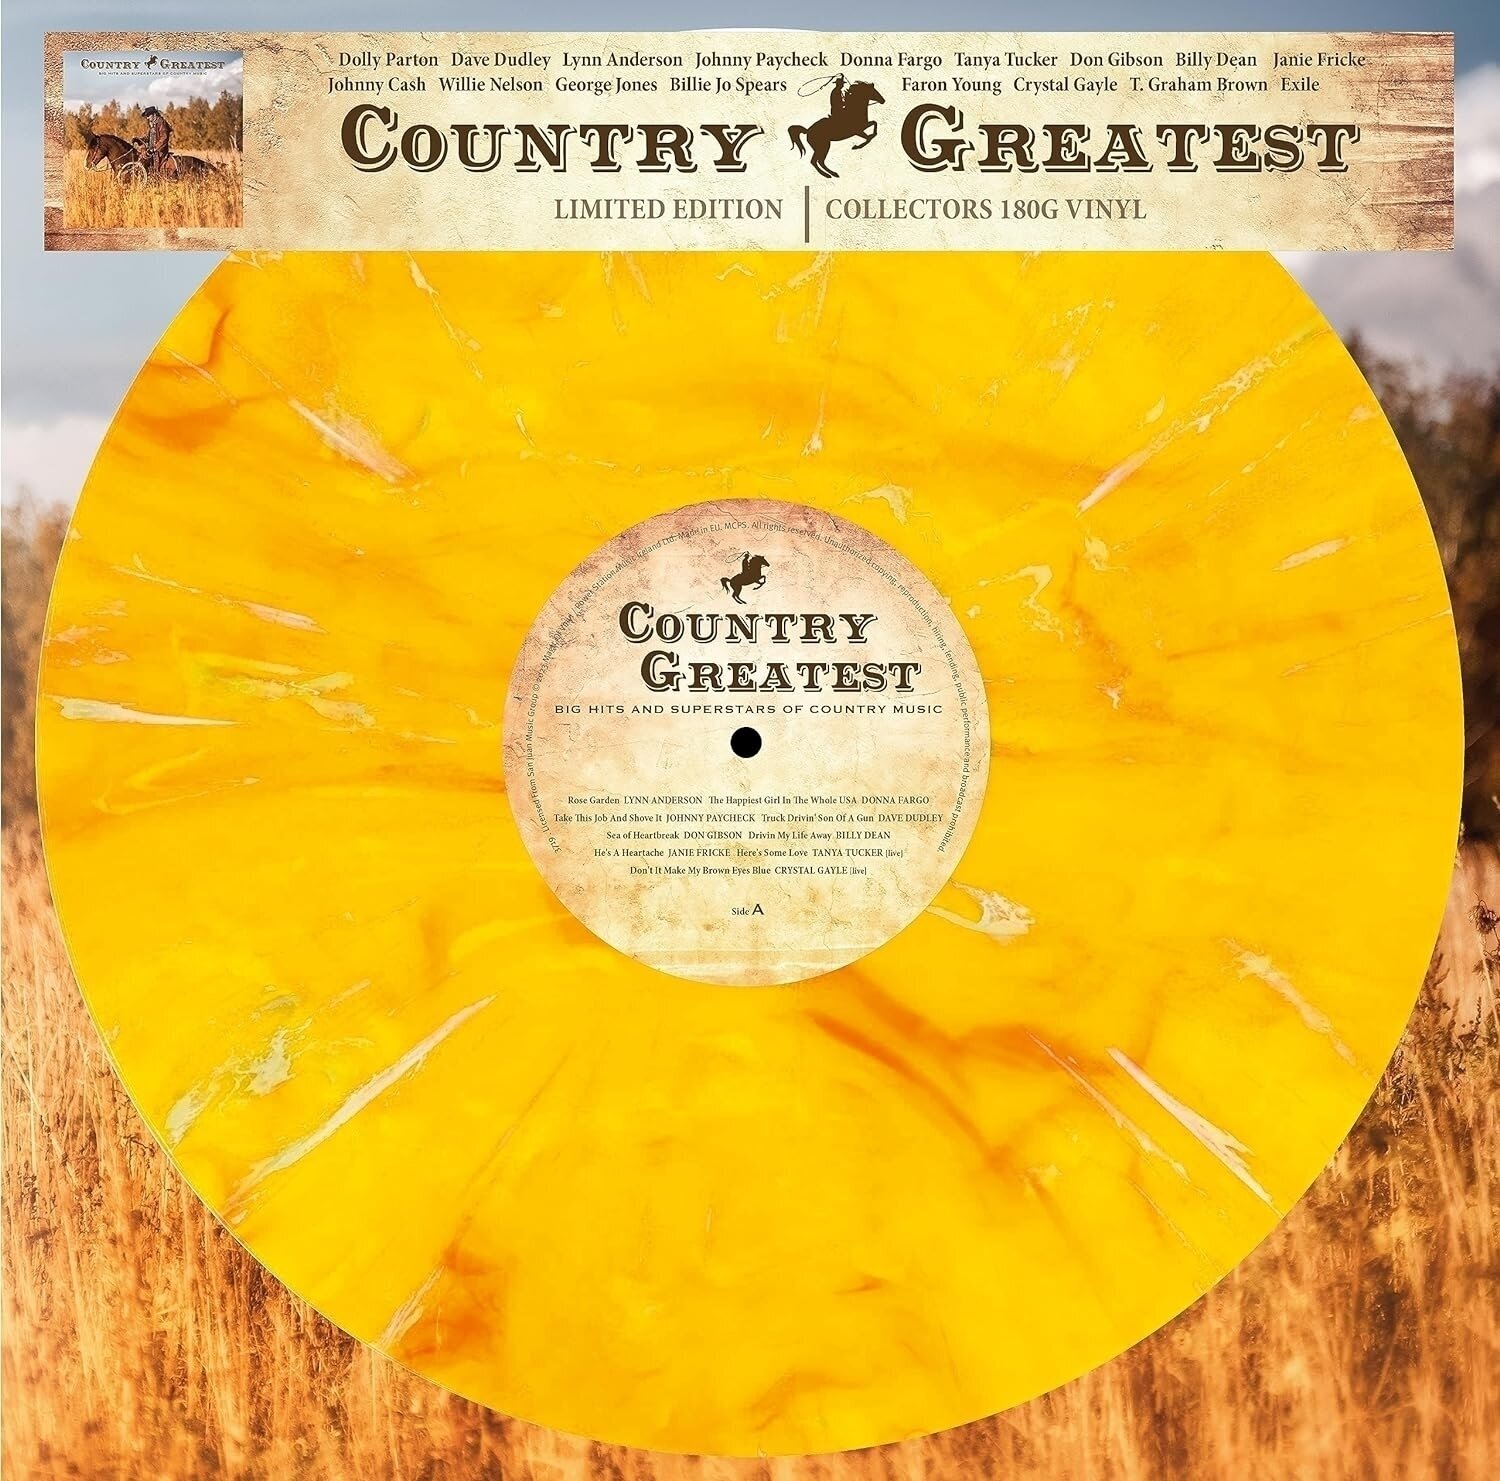 Disco de vinilo Various Artists - Country Greatest - Big Hits And Superstars Of Country Music (Limited Edition) (Yellow Marbled) (LP) Disco de vinilo